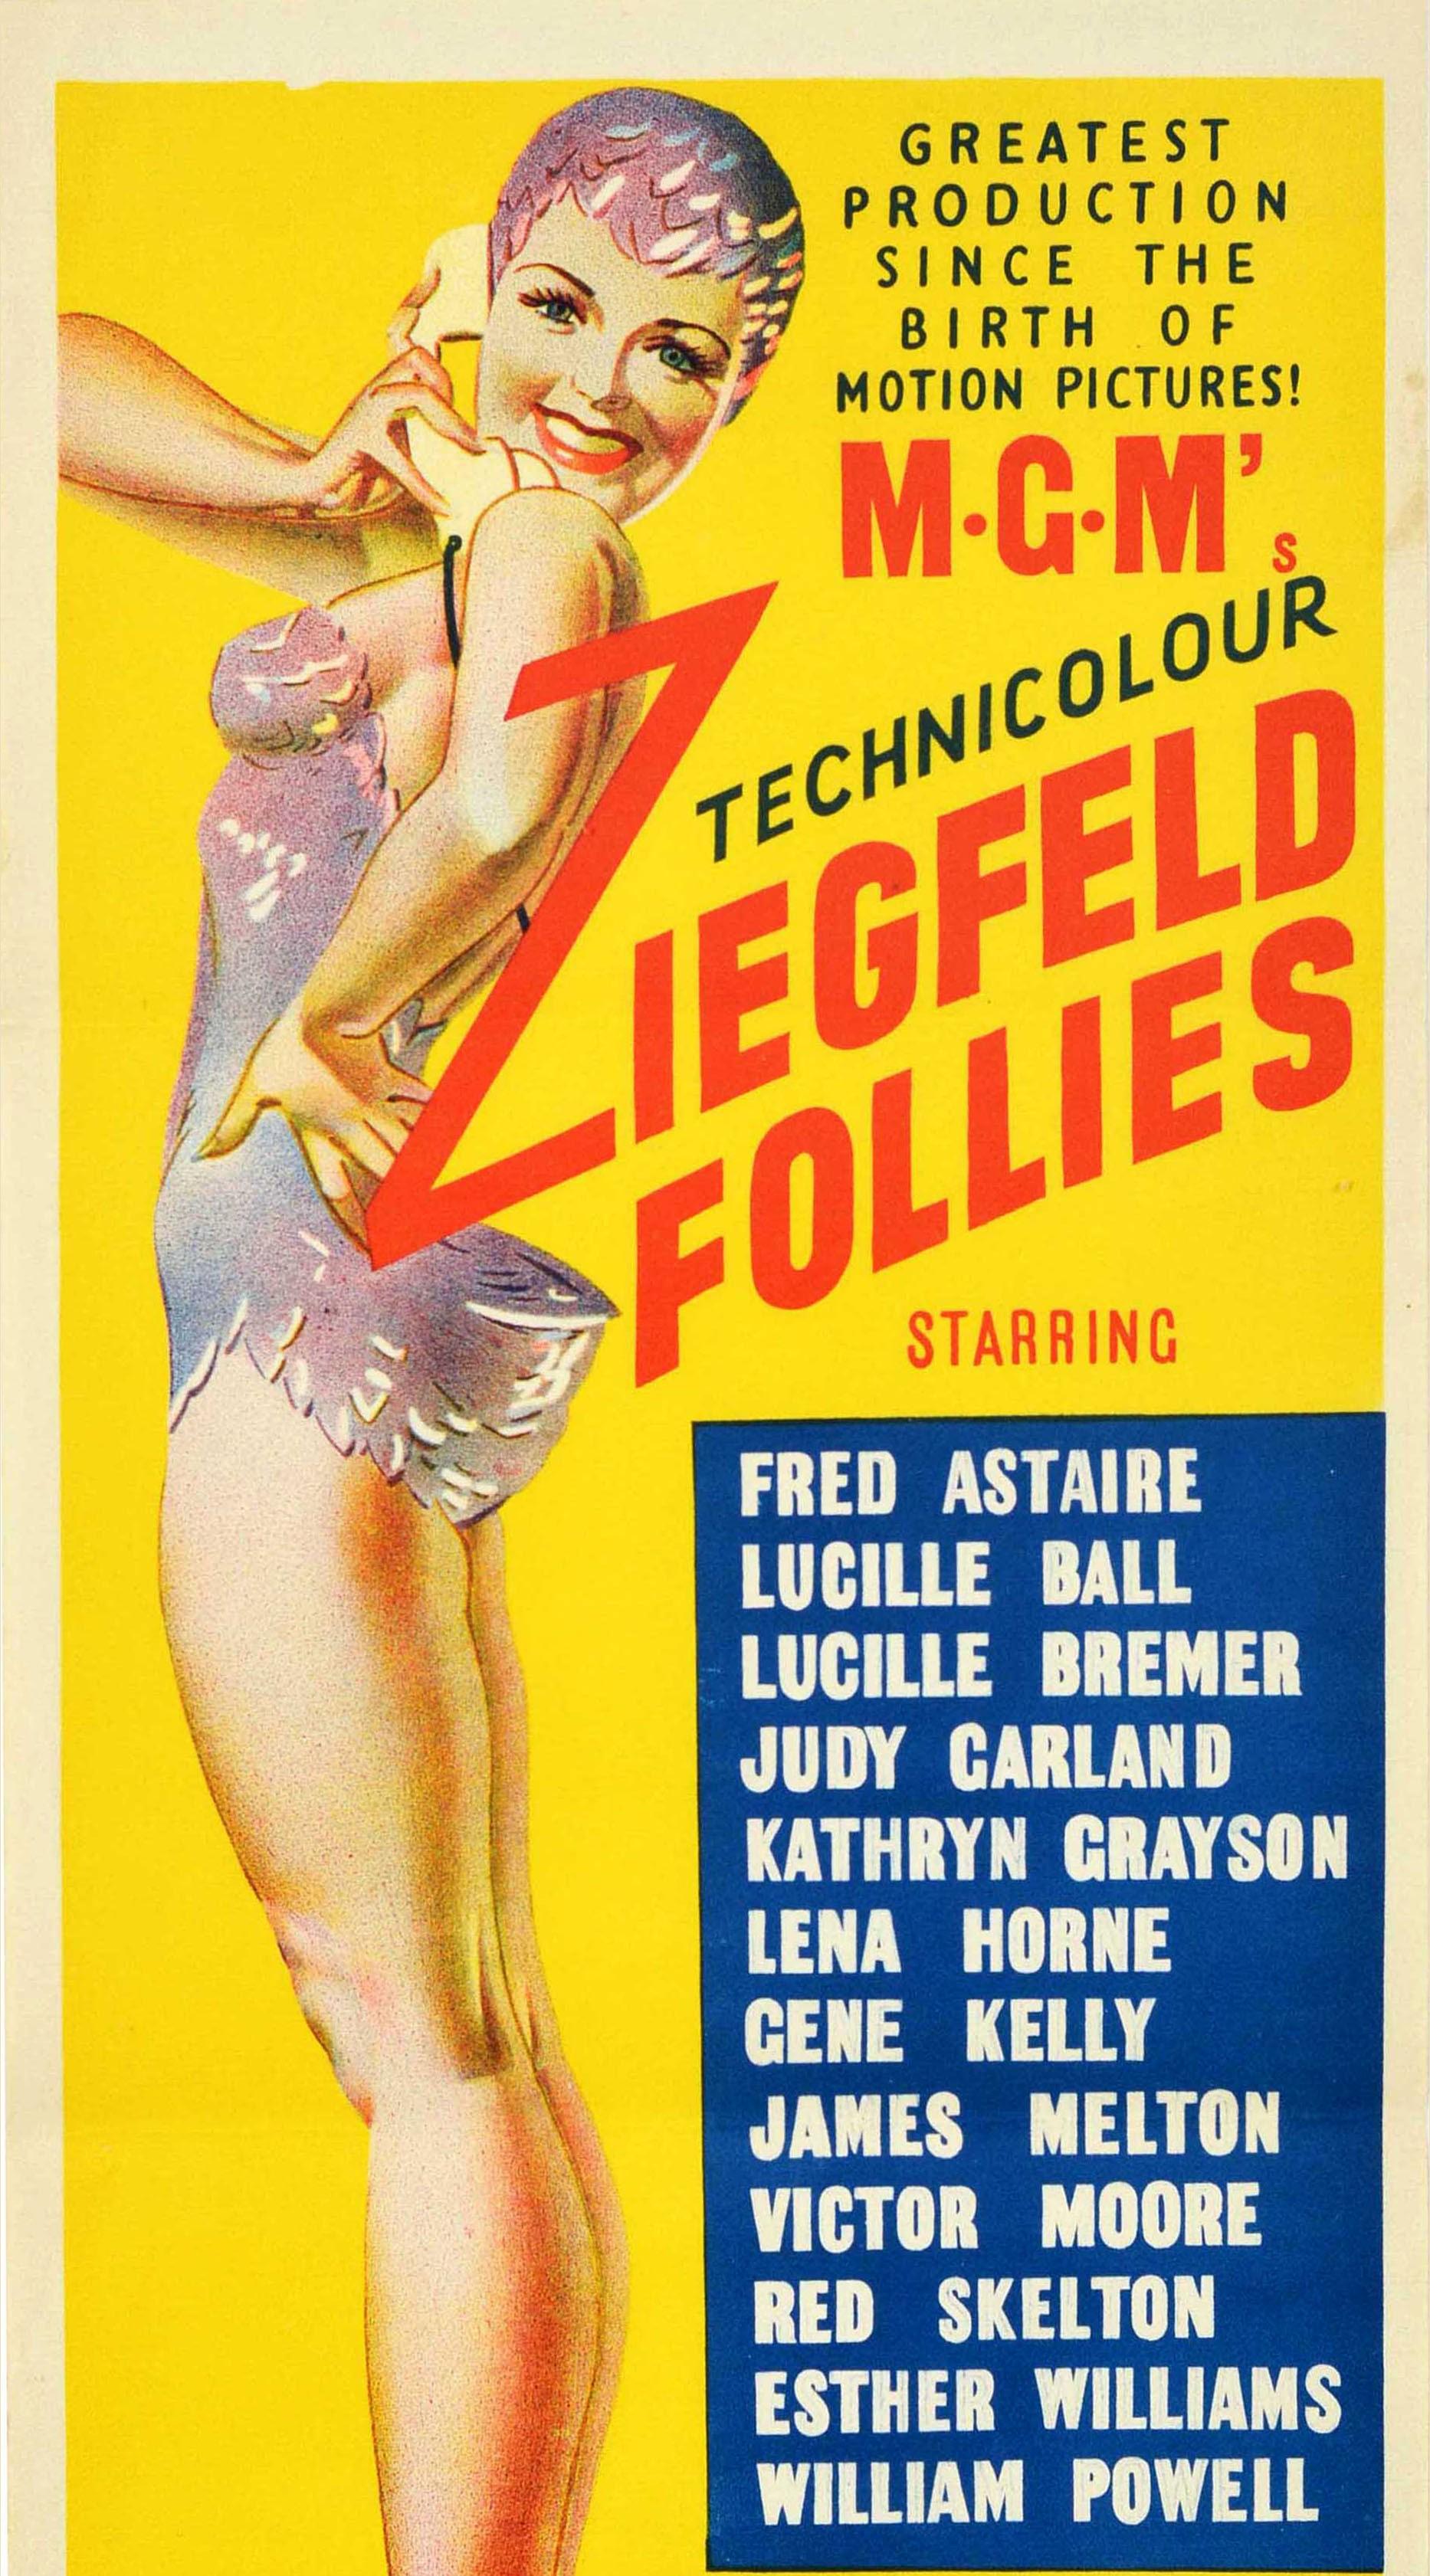 Original vintage movie poster for an MGM film in Technicolour - Ziegfeld Follies - the Greatest production since the birth of motion pictures! featuring an all star cast including Fred Astaire, Judy Garland, Lucille Ball, Lucille Bremer, Gene Kelly